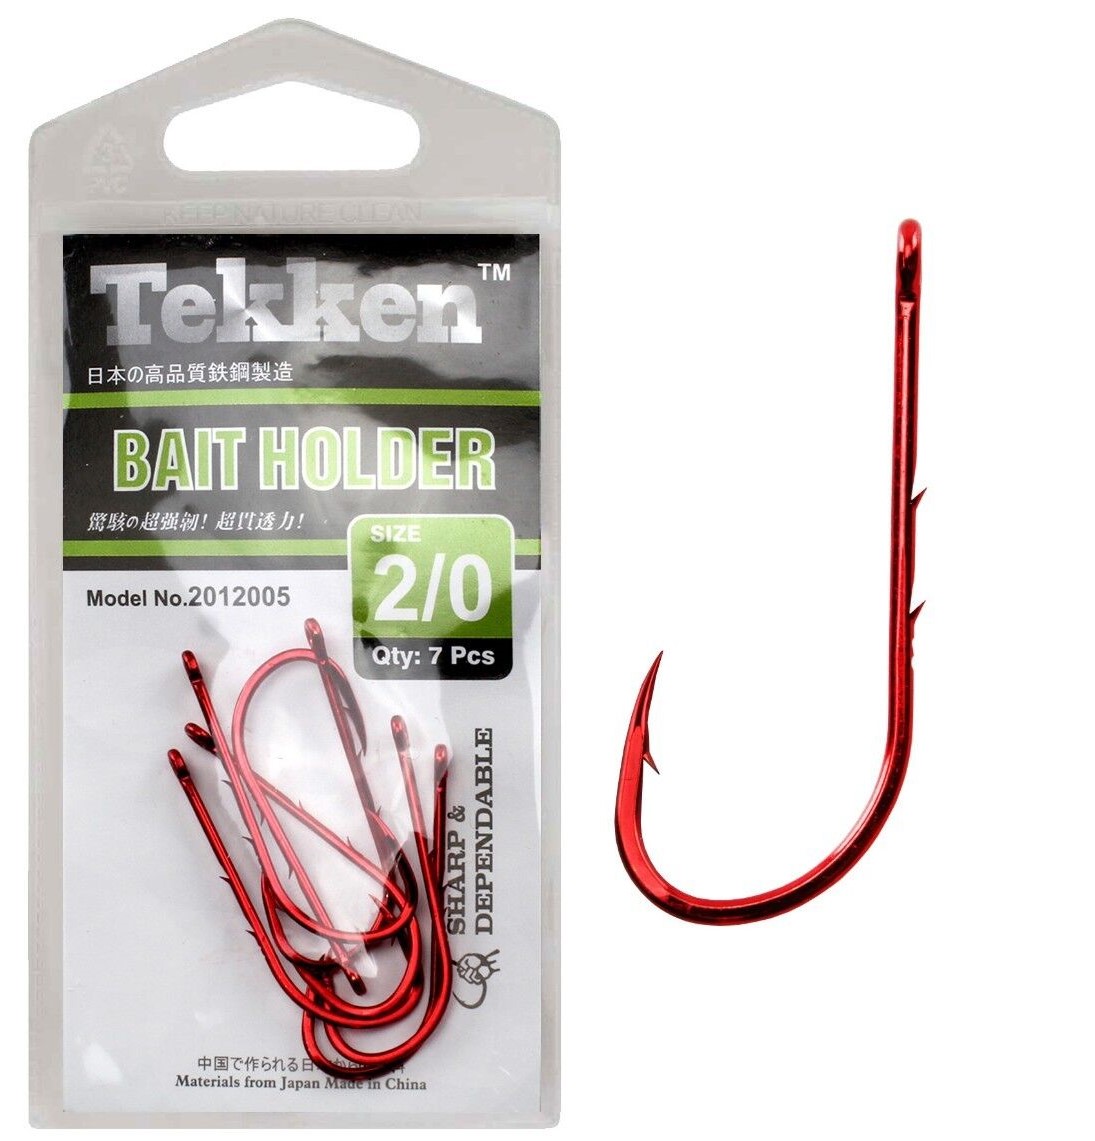 TRUSCEND Power Soft Fishing Lures Pre-Rigged BKK Hook, Japan